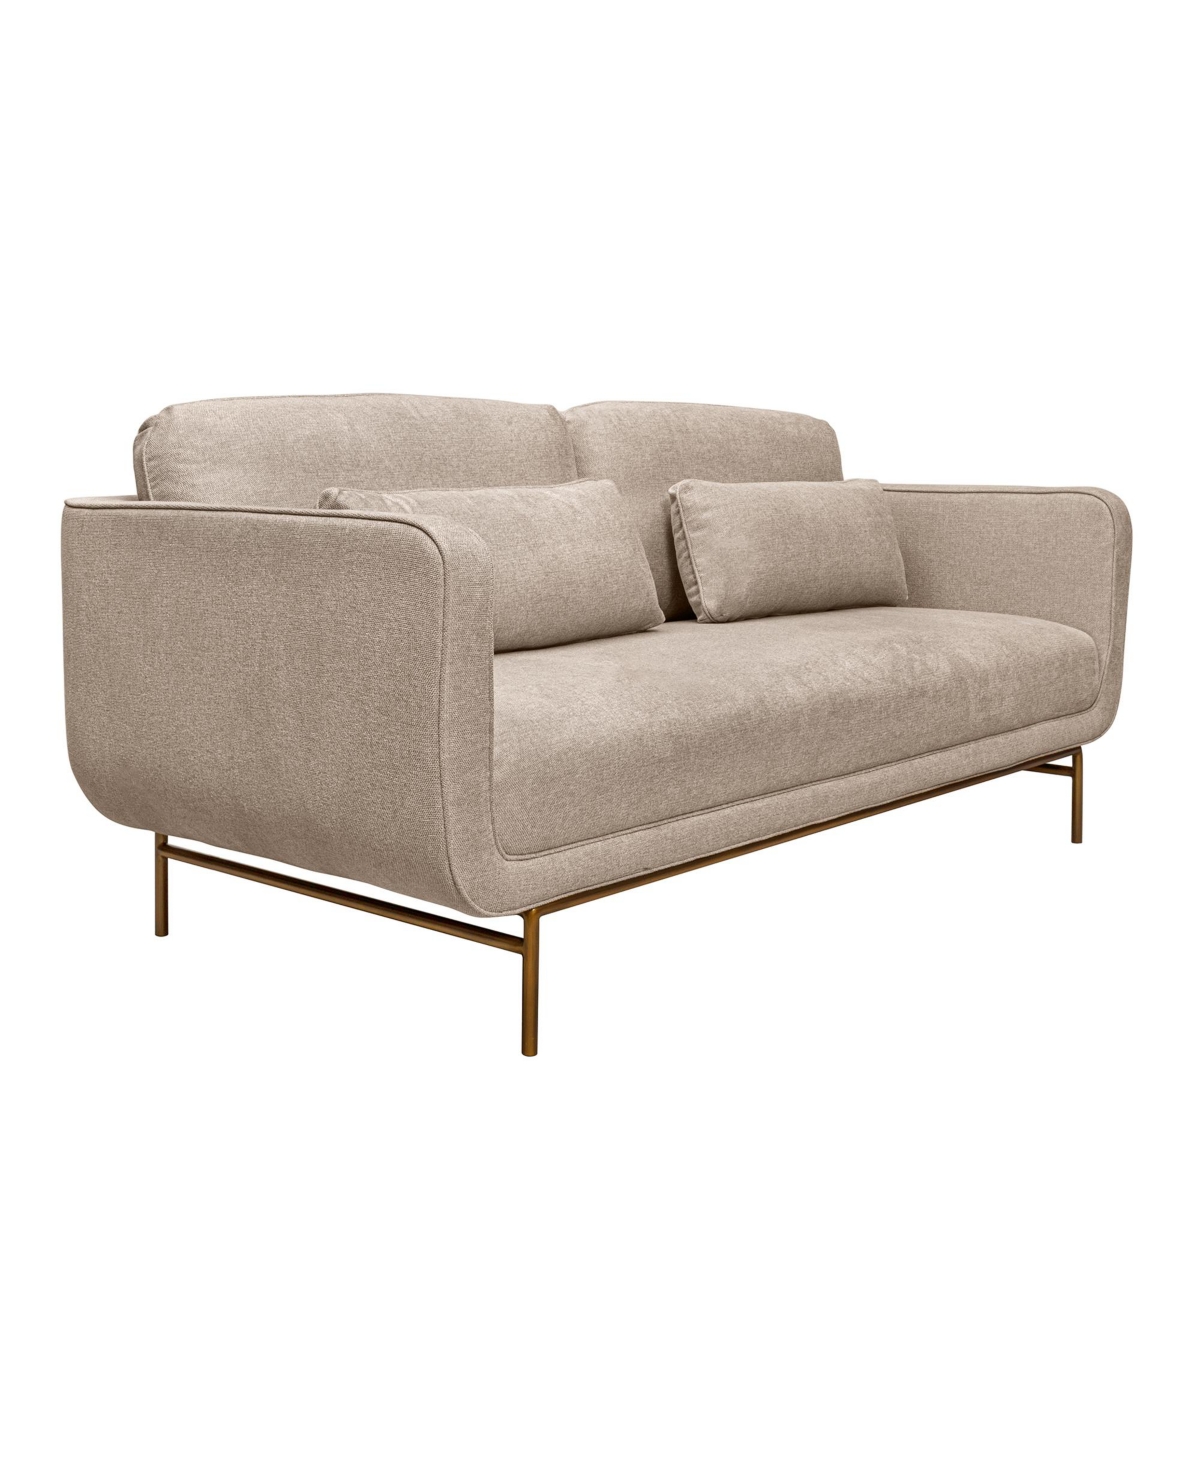 Armen Living Lilou 77" Polyester, Nylon With Metal Legs Sofa In Beige,antique Brass